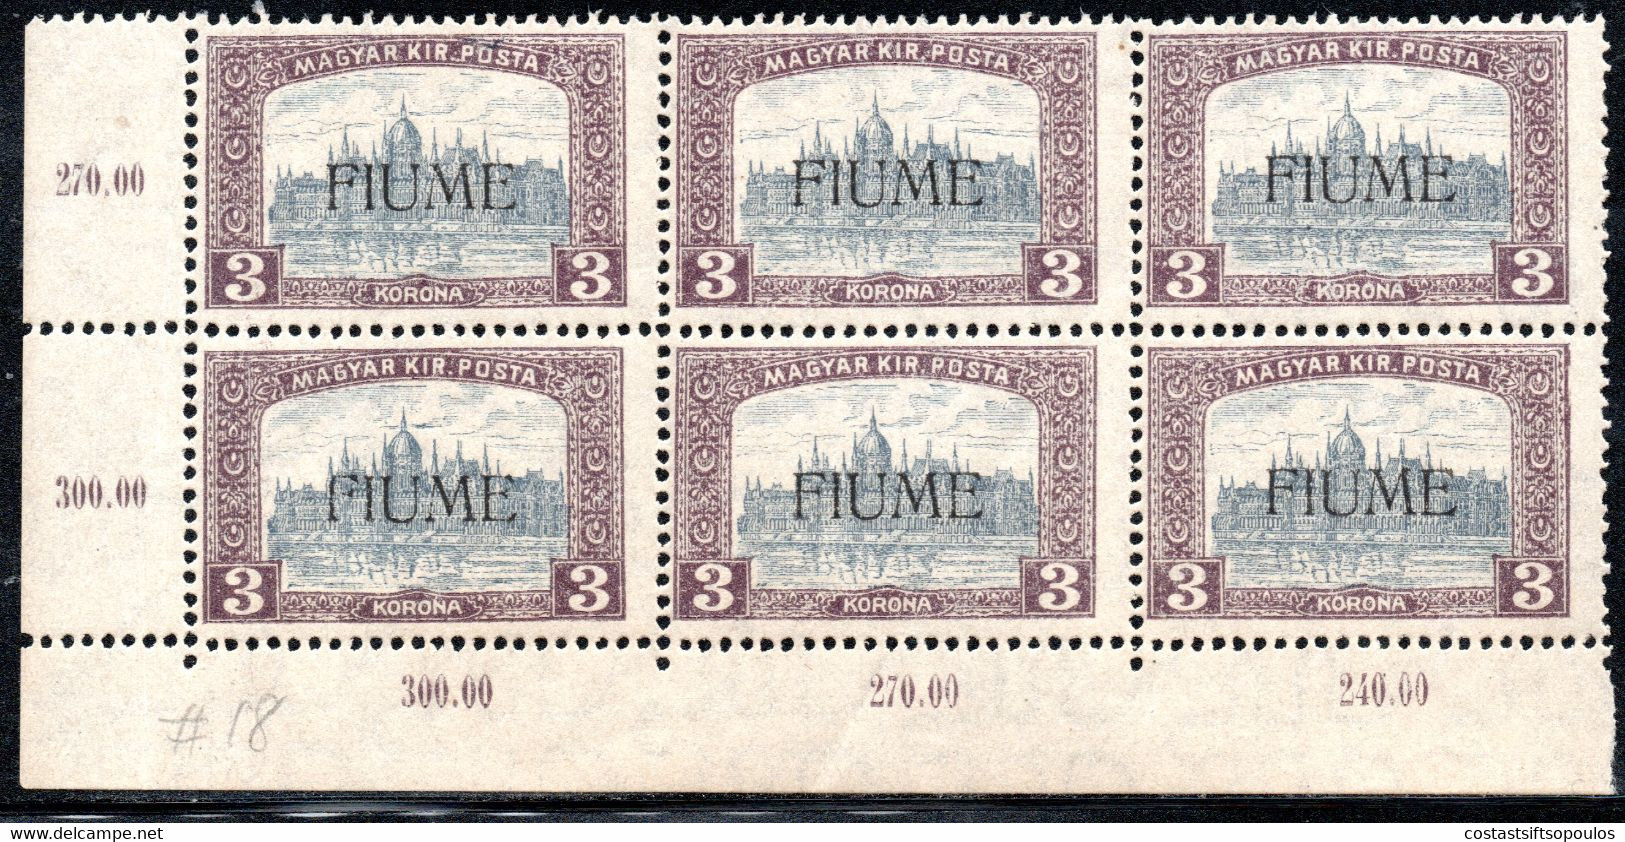 887.ITALY,HUNGARY,FIUME 1918 3 KR. PARLIAMENT Y.T. 19 MNH CORNER BLOCK OF 6,NATURAL WRINKLE - Fiume